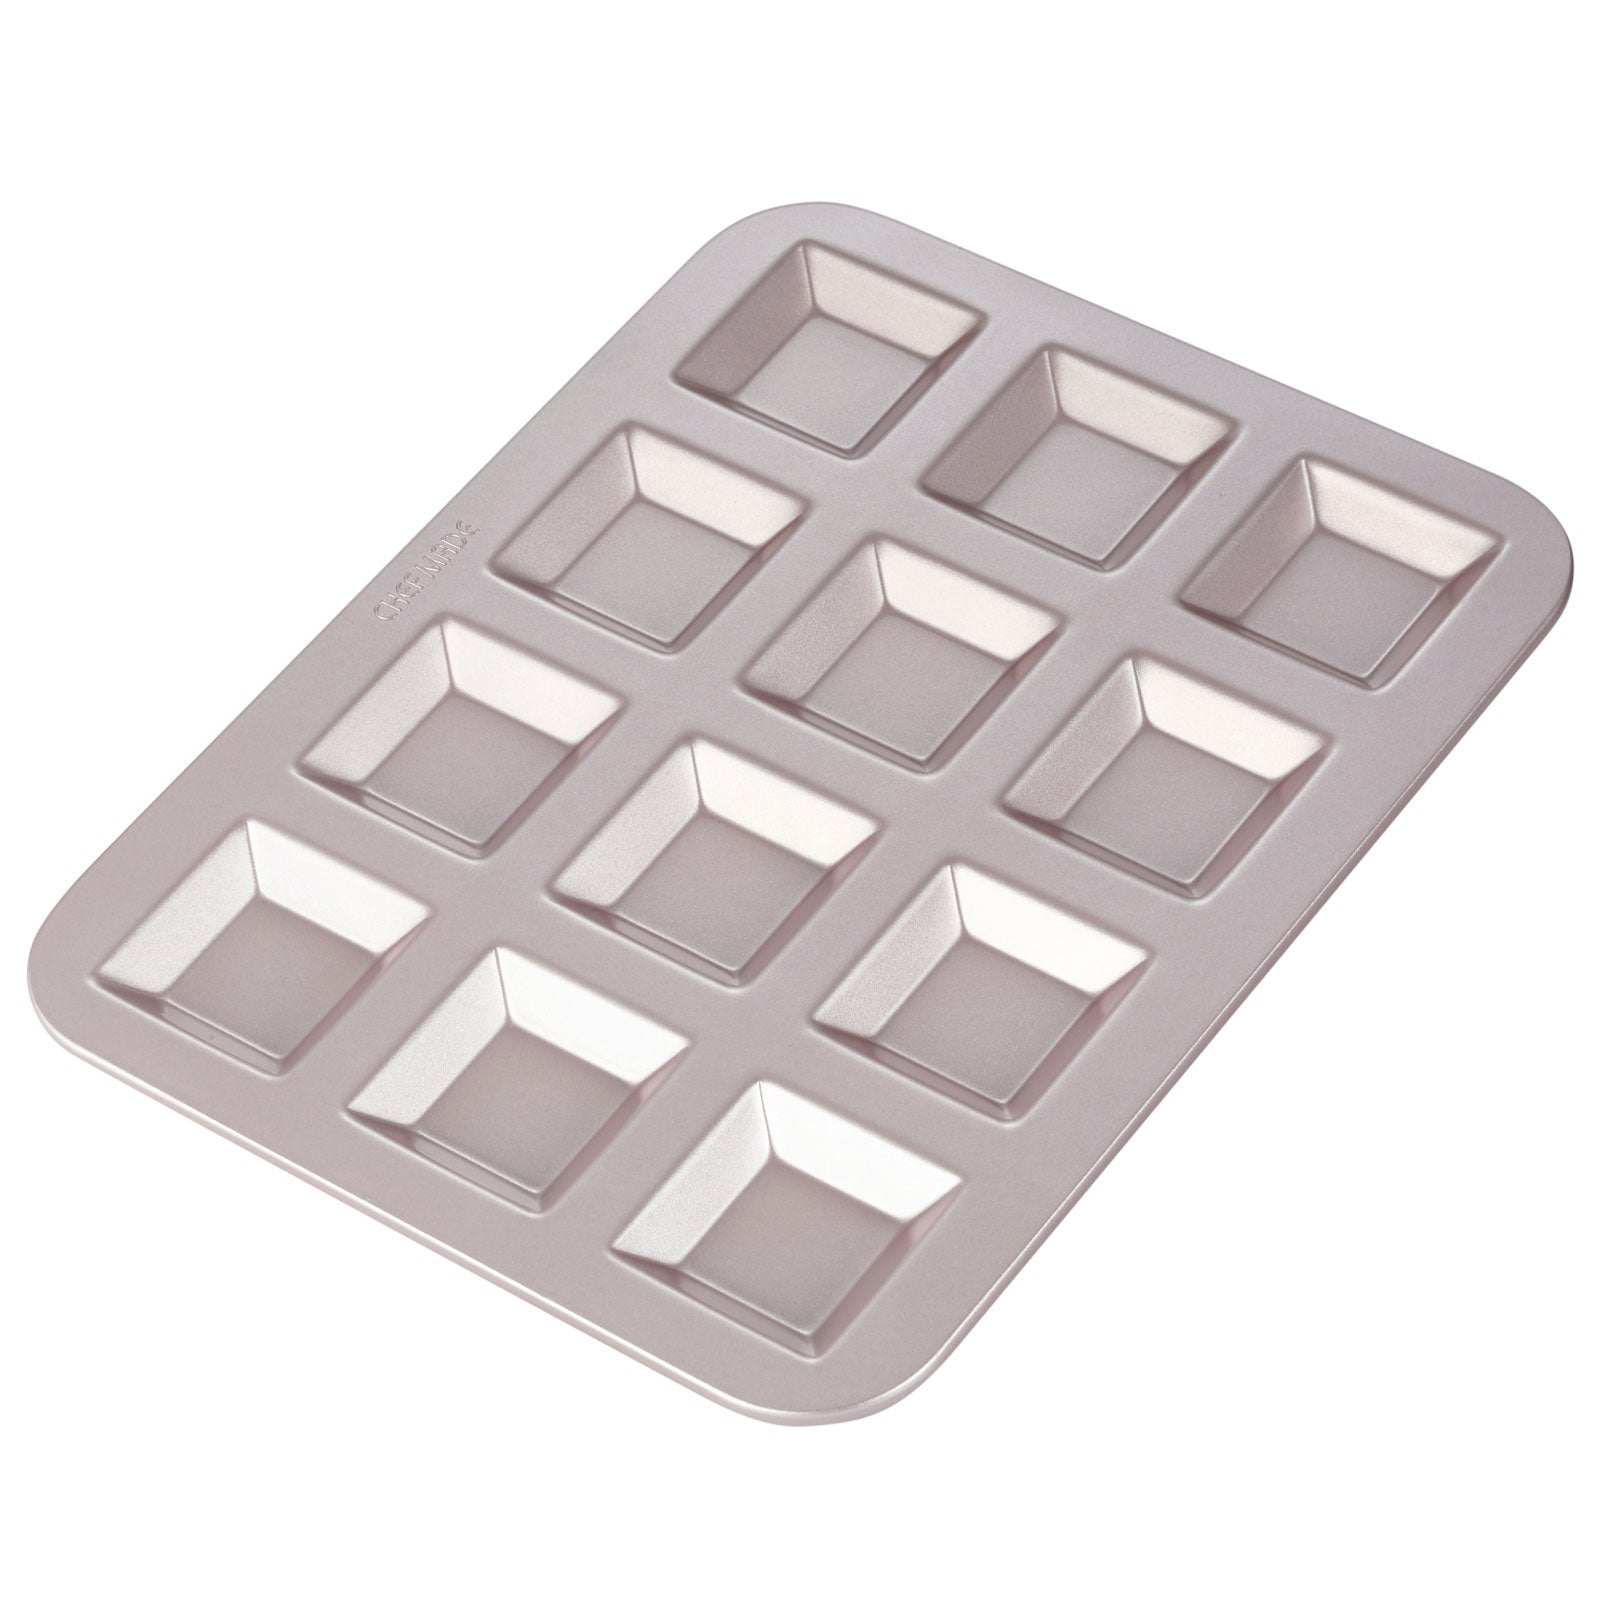 Financier Cake Pan Square 12 Well - CHEFMADE official store